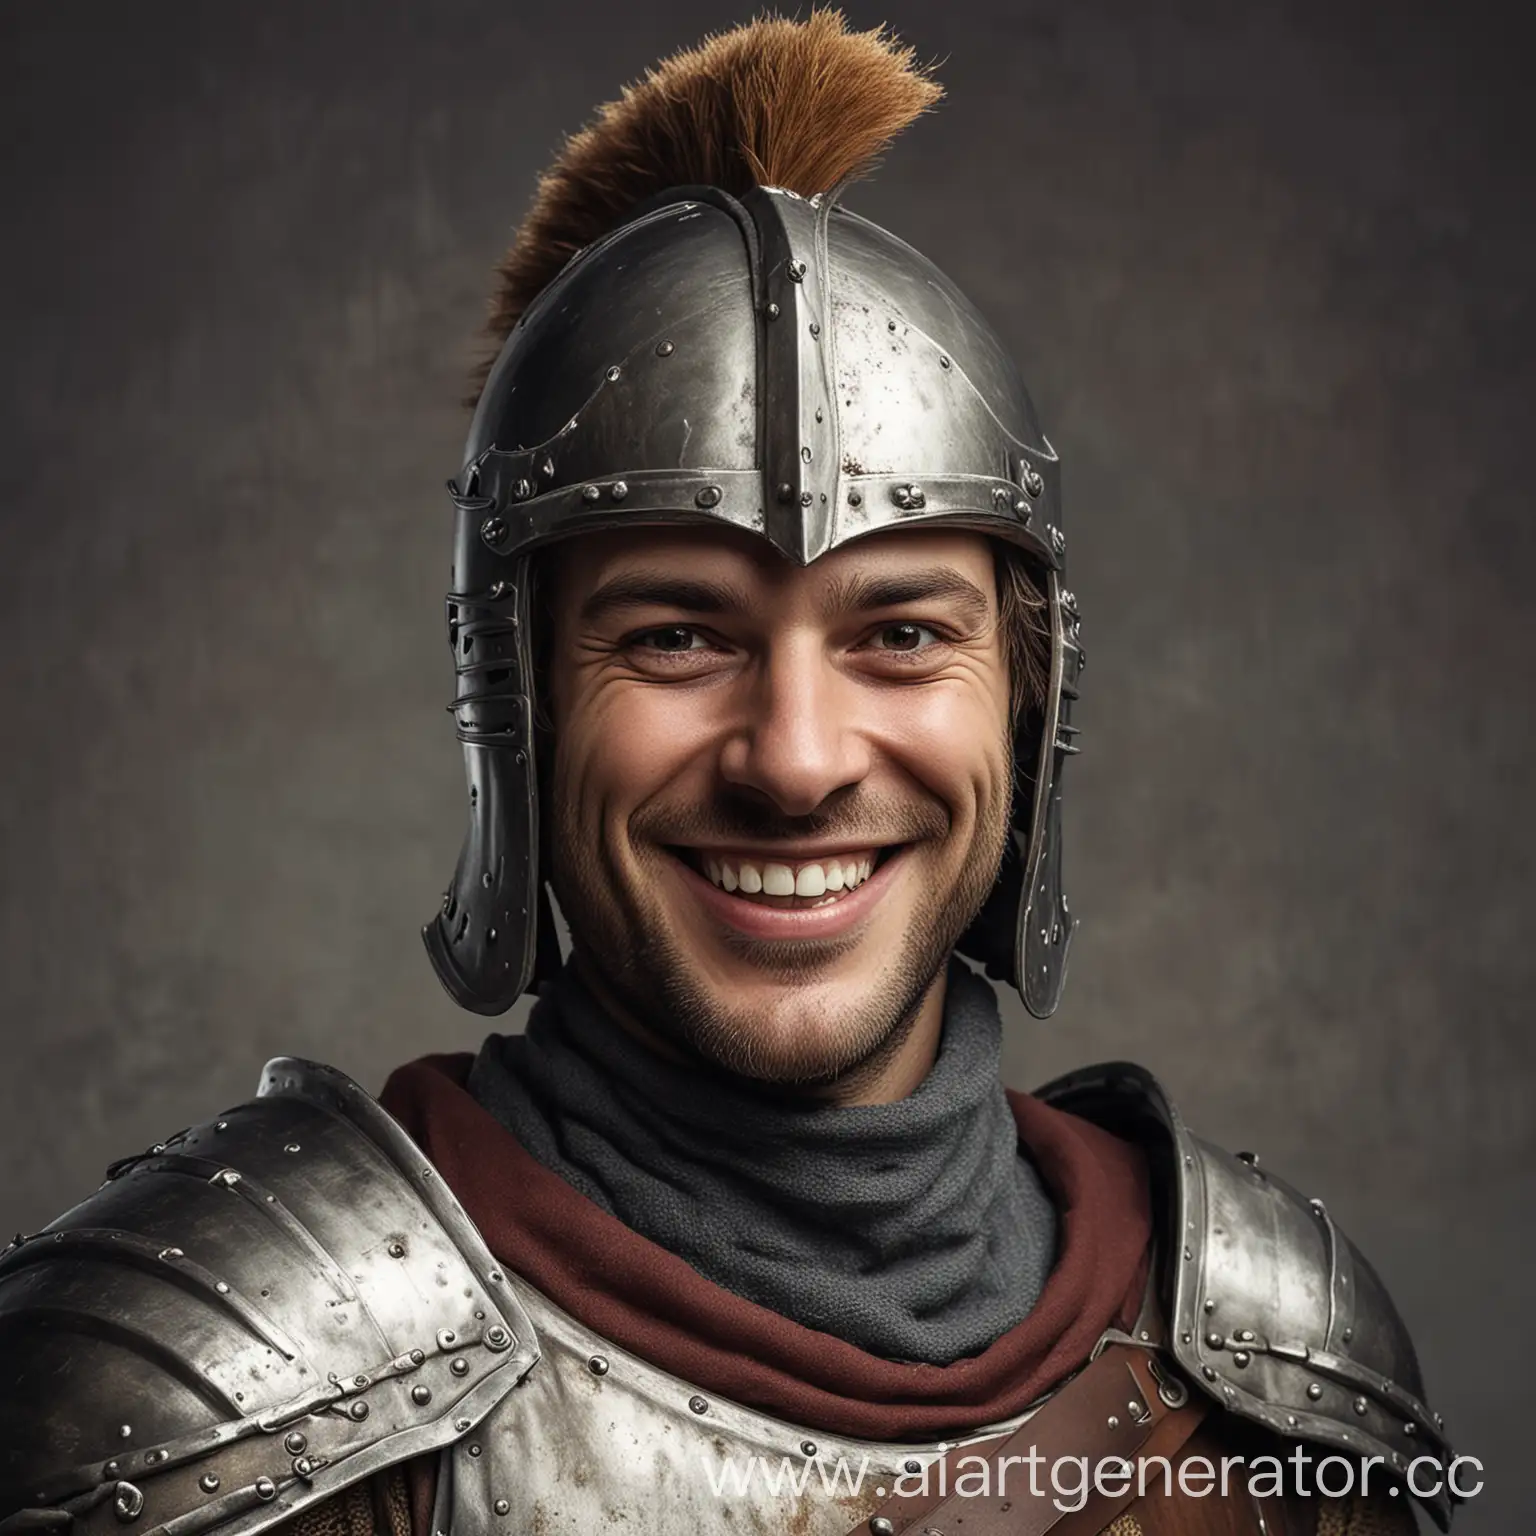 Smiling-Knight-in-Open-Helmet-Medieval-Warrior-with-Joyful-Expression